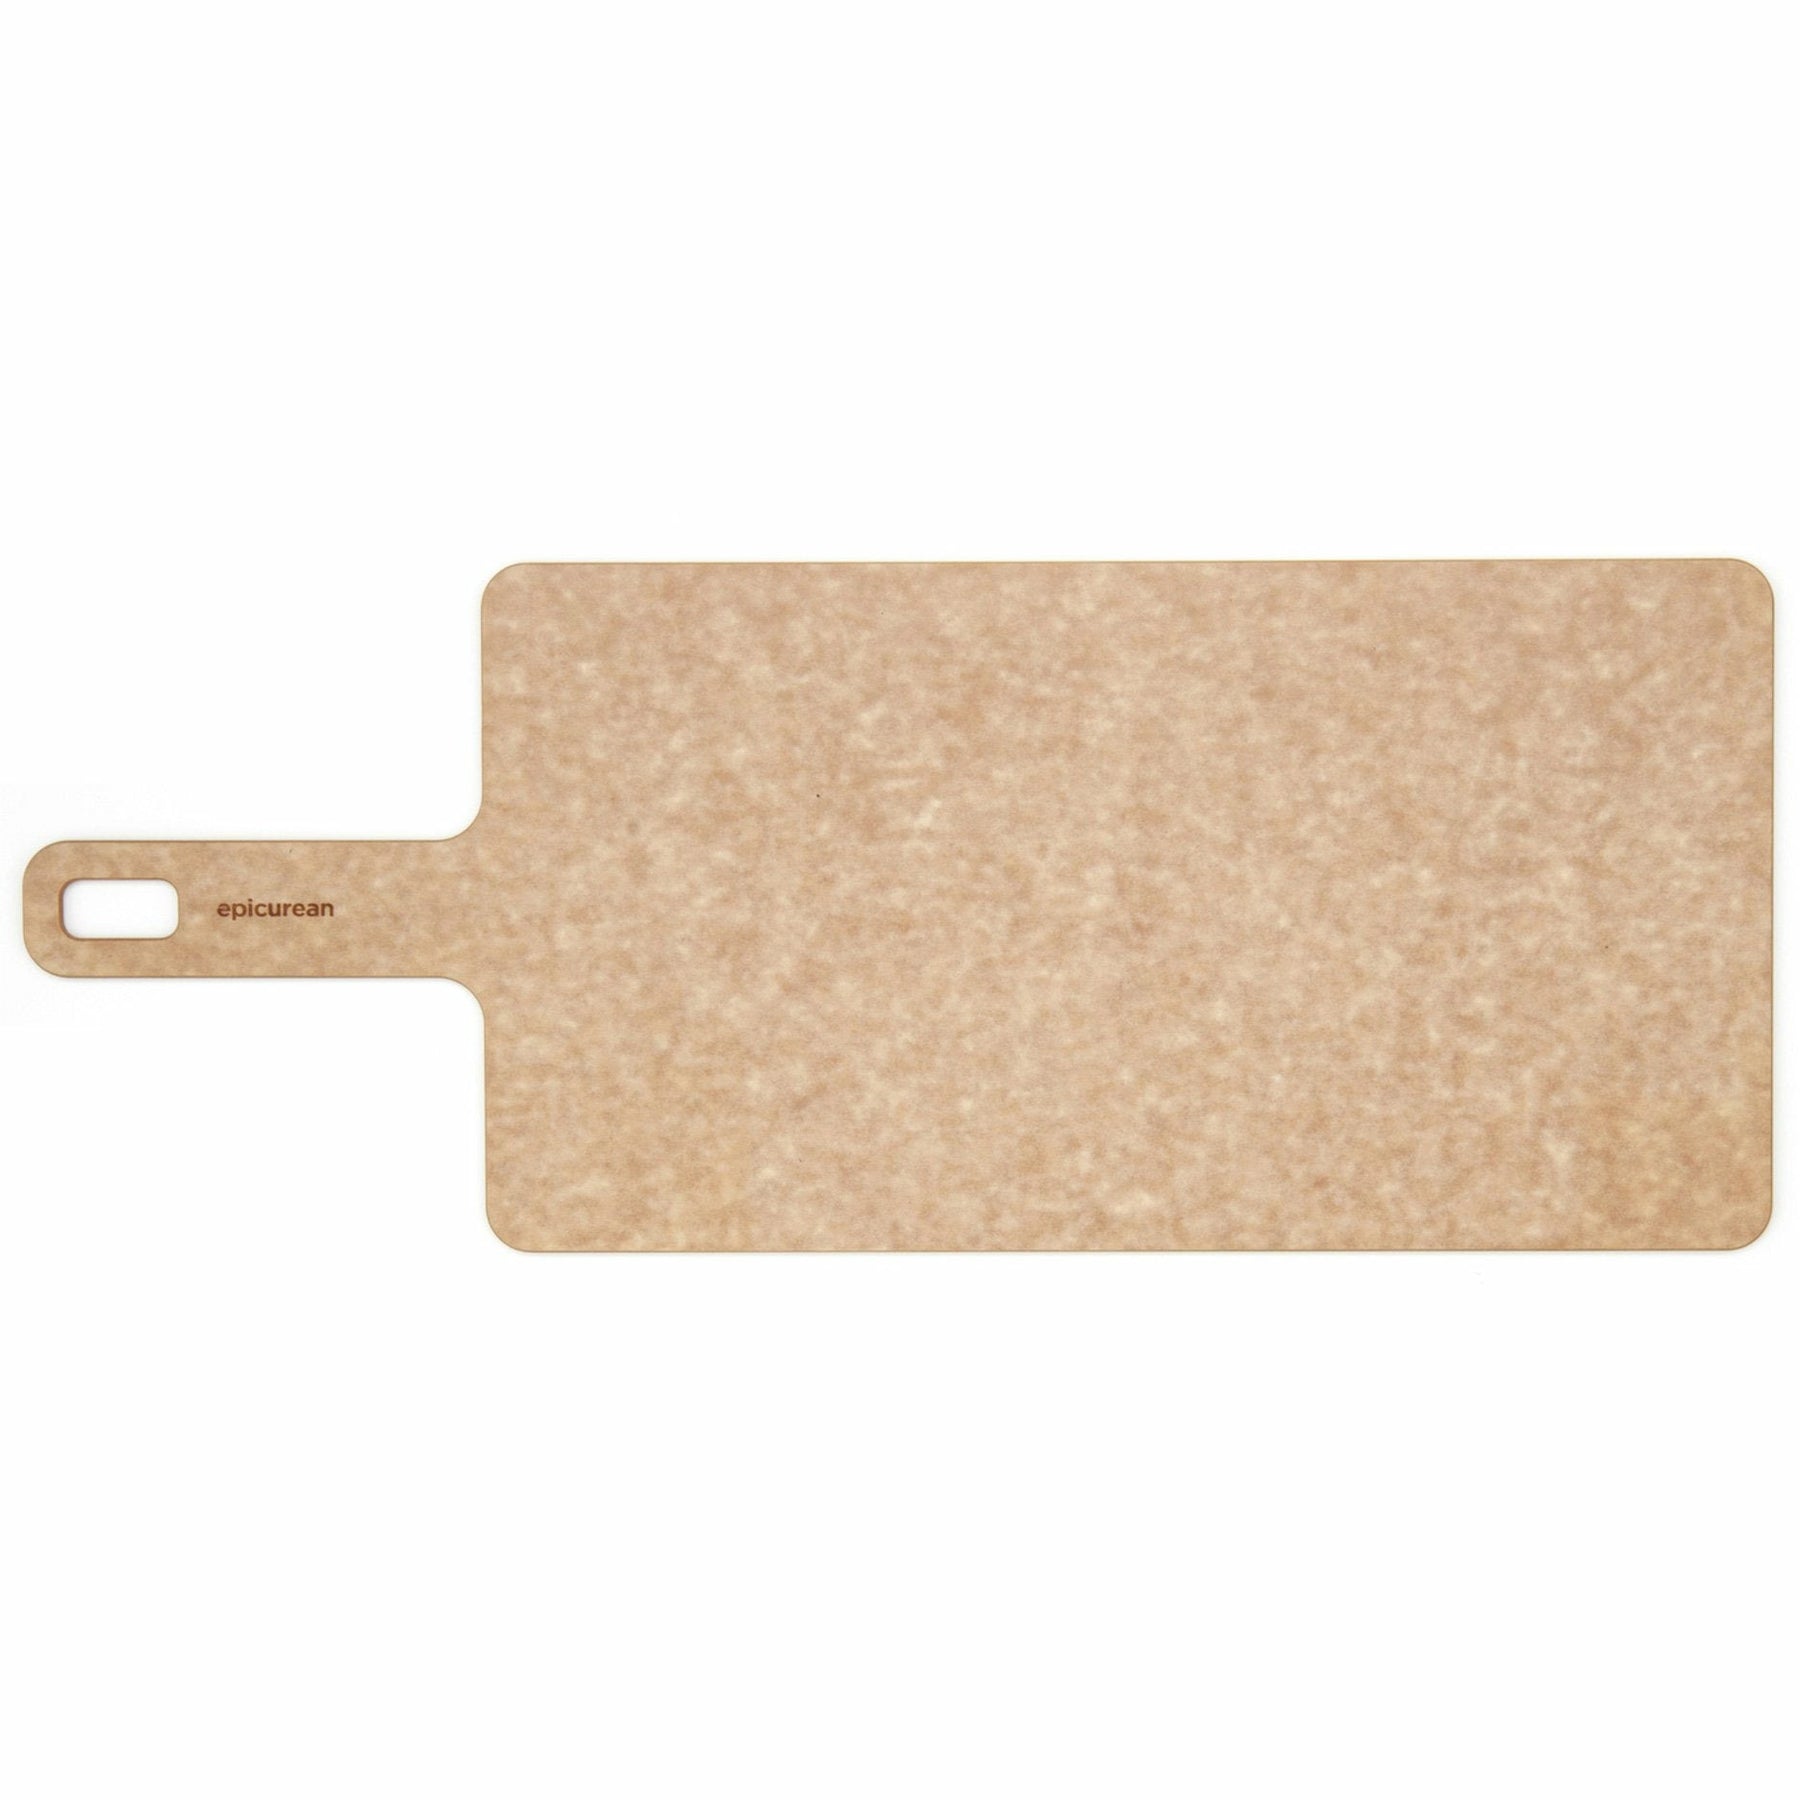 Polder Moderate Use Ironing Pad and Cover - Natural